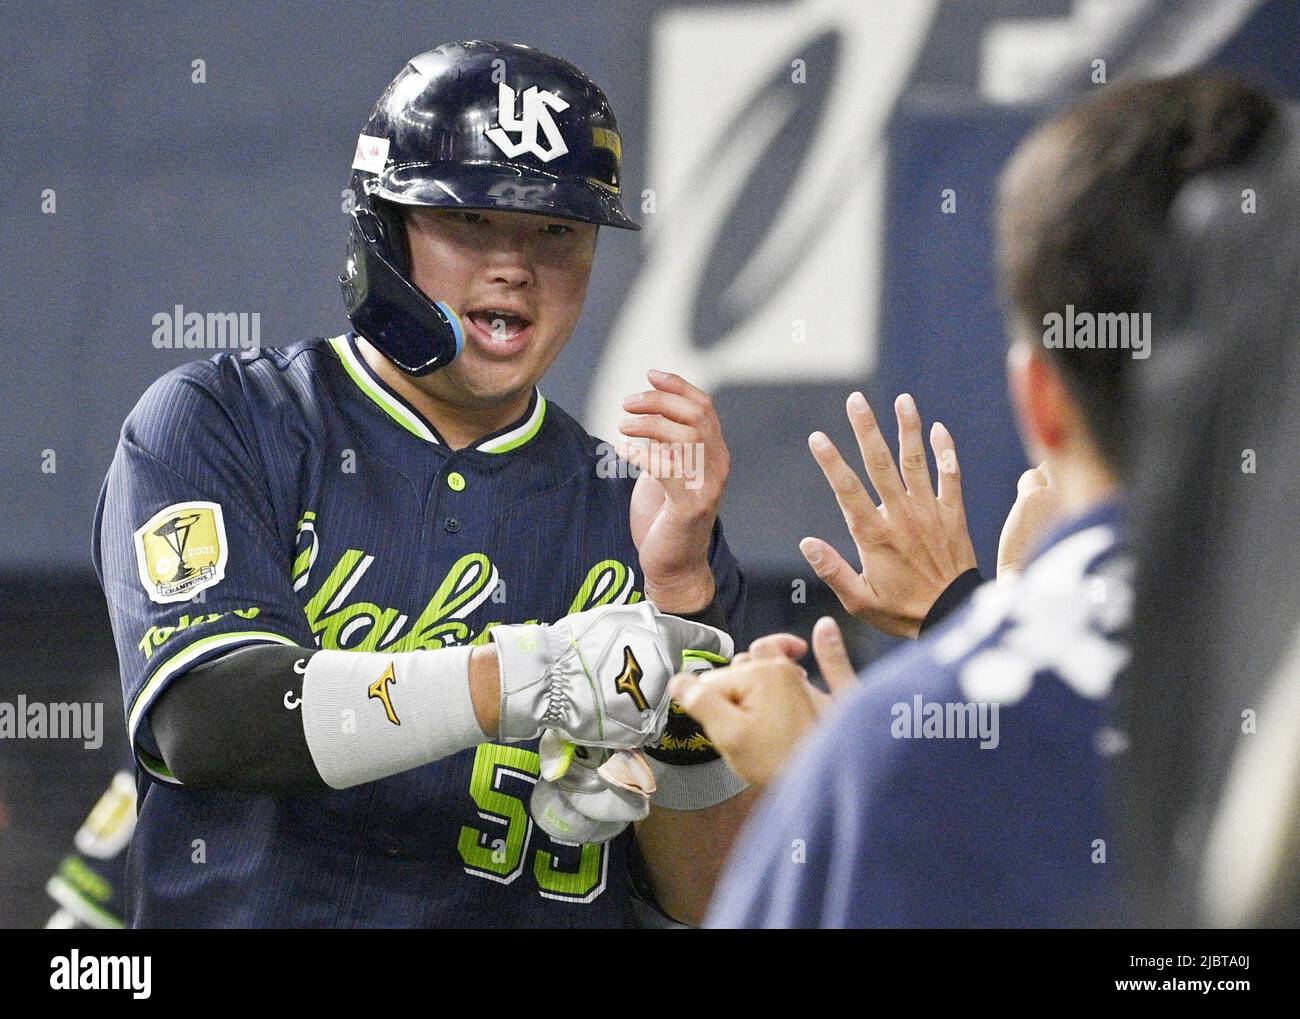 Munetaka Murakami of the Yakult Swallows celebrates with teammates after  scoring on a sacrifice fly by Shingo Kawabata in the eighth inning of an  interleague baseball game against the Orix Buffaloes on